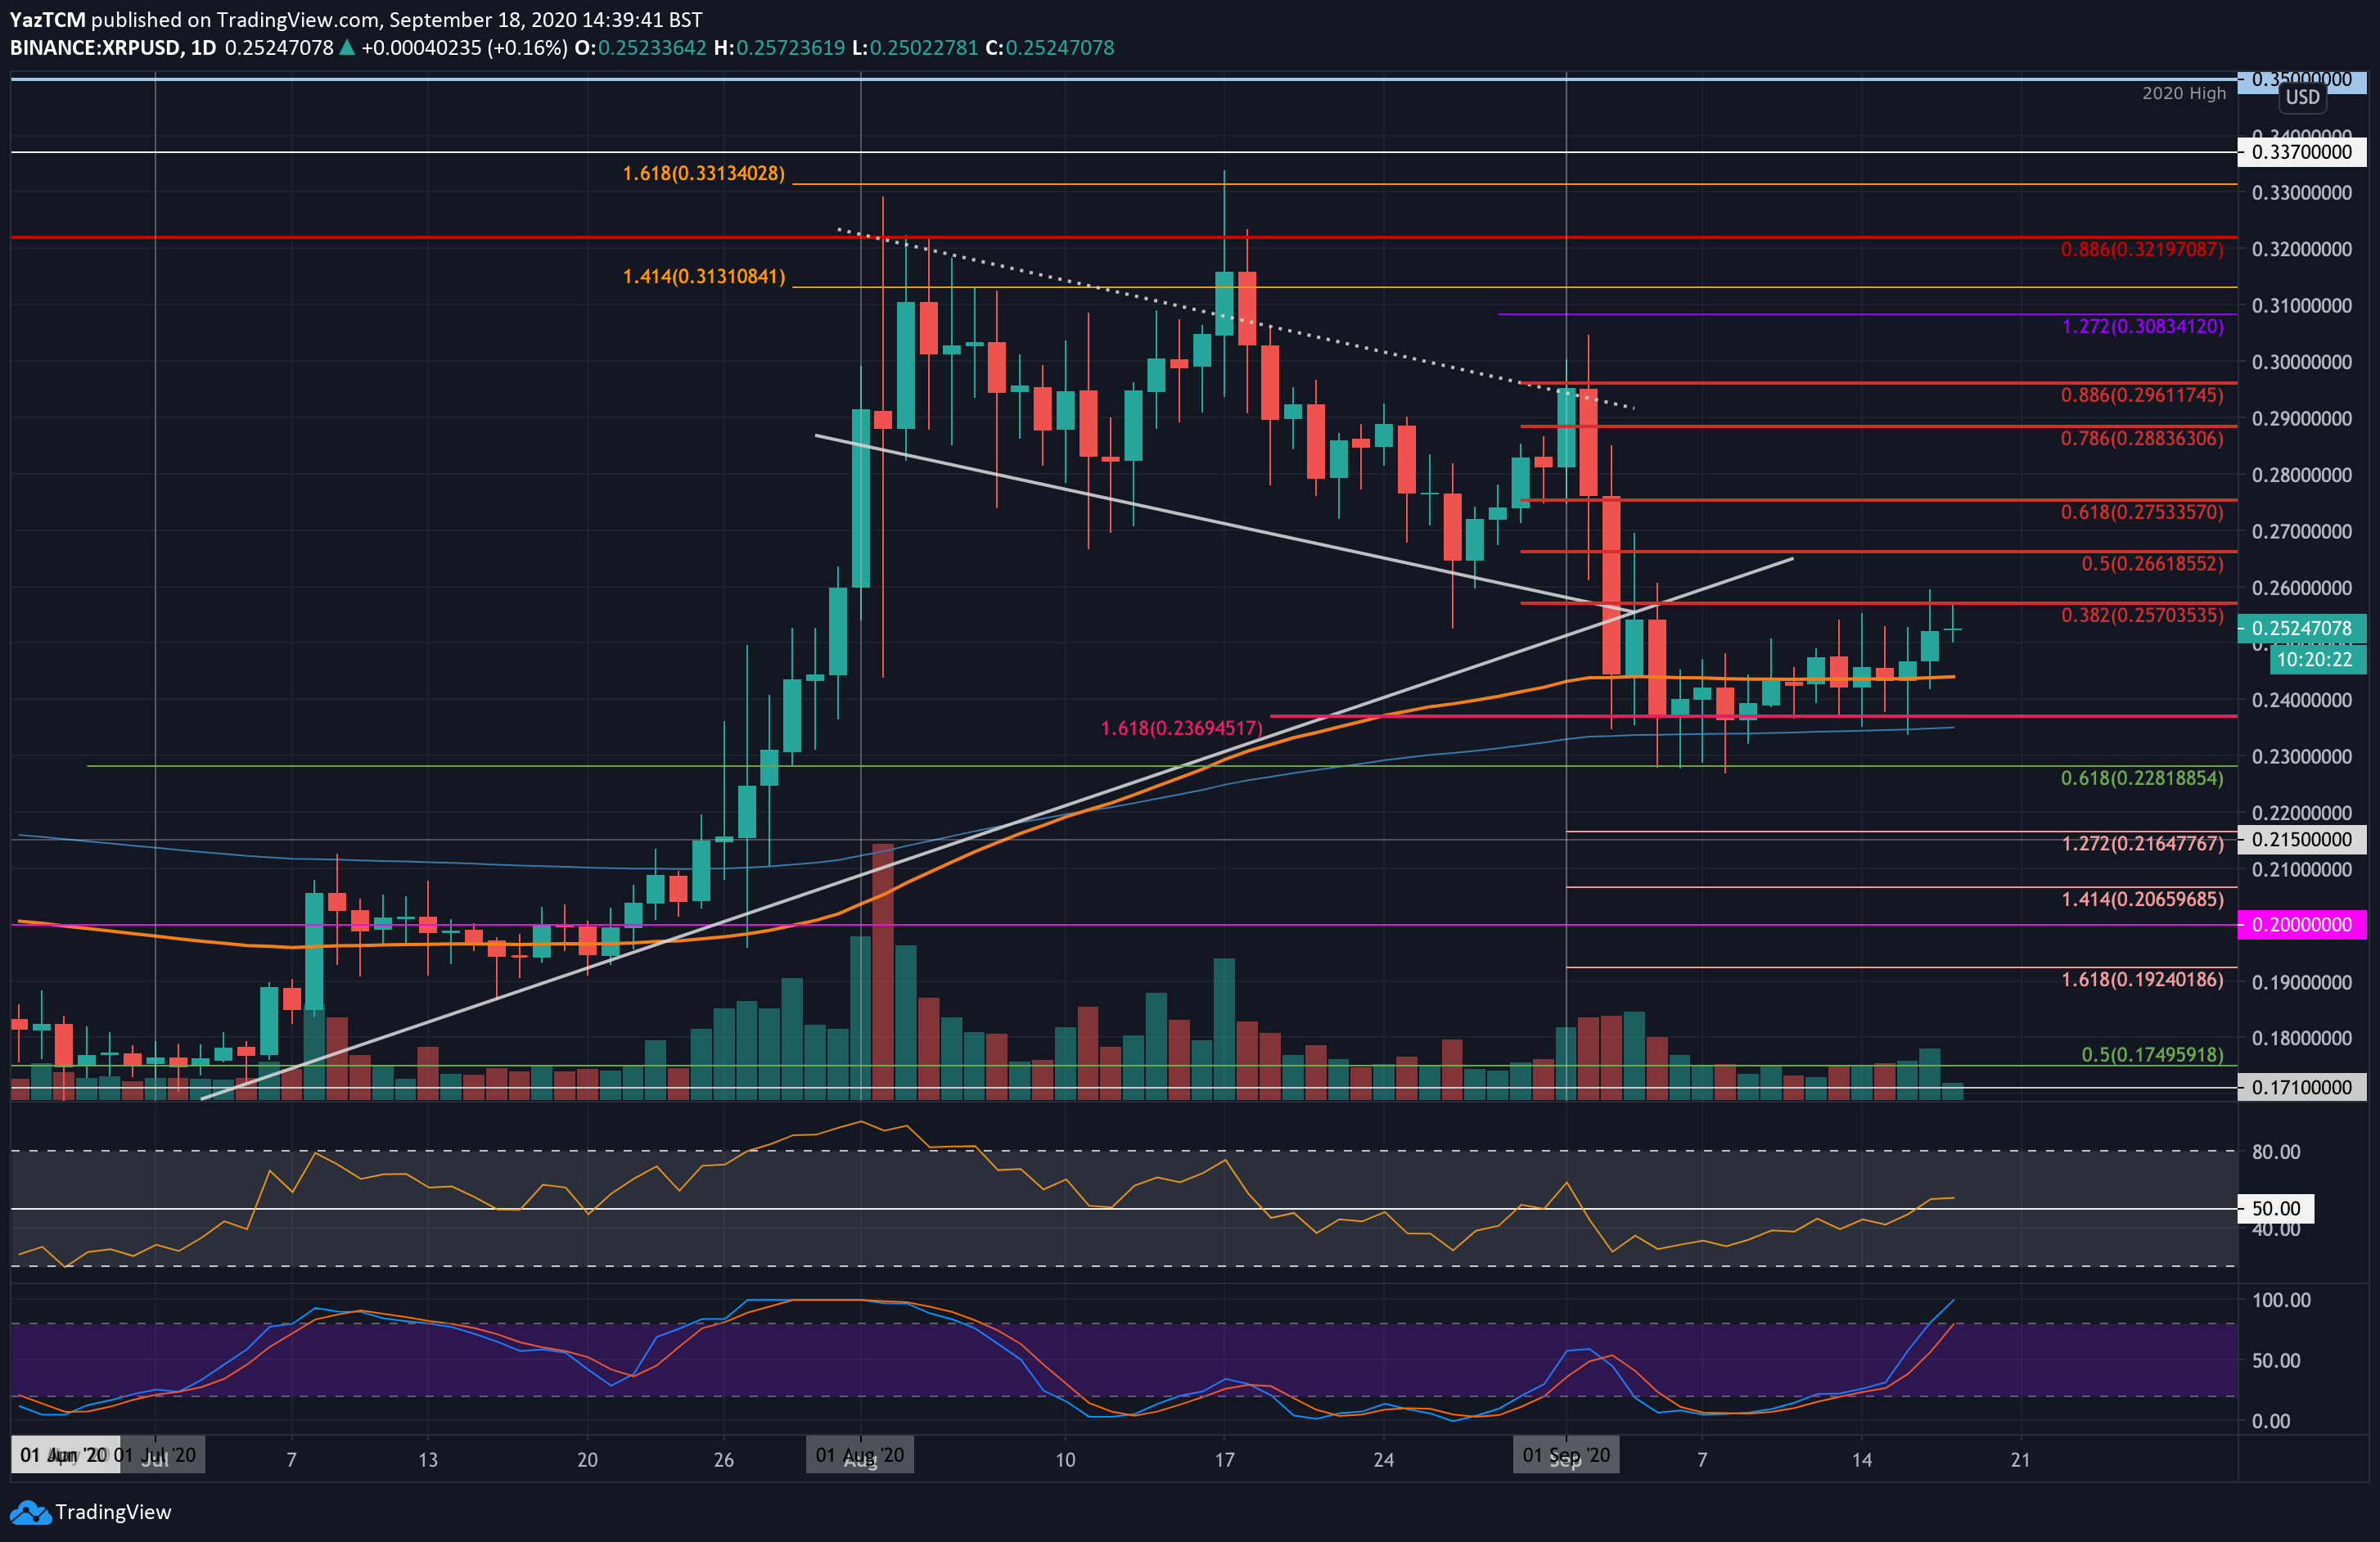 Crypto Price Analysis & Overview September 18th: Bitcoin, Ethereum, Ripple, Binance Coin, and Polkadot